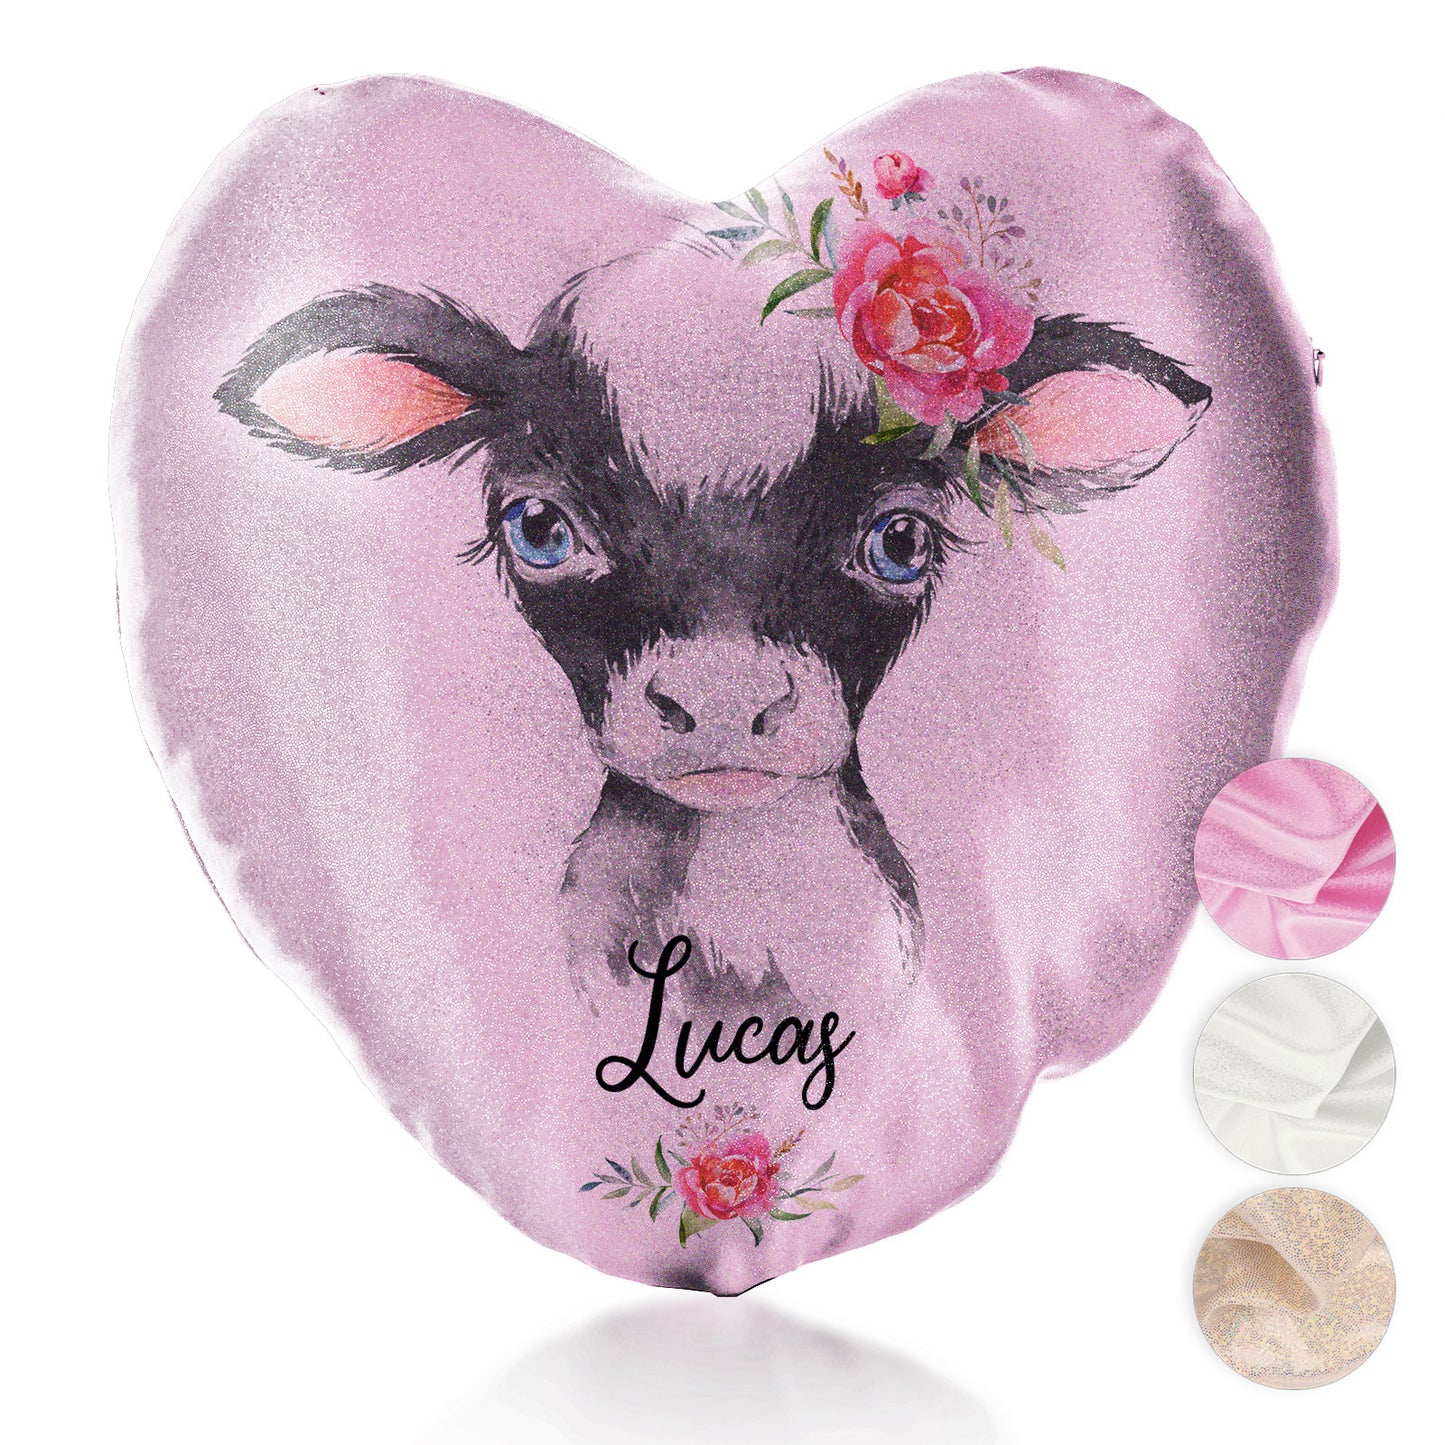 Personalised Glitter Heart Cushion with Black and White Cow Pink Rose Flowers and Cute Text